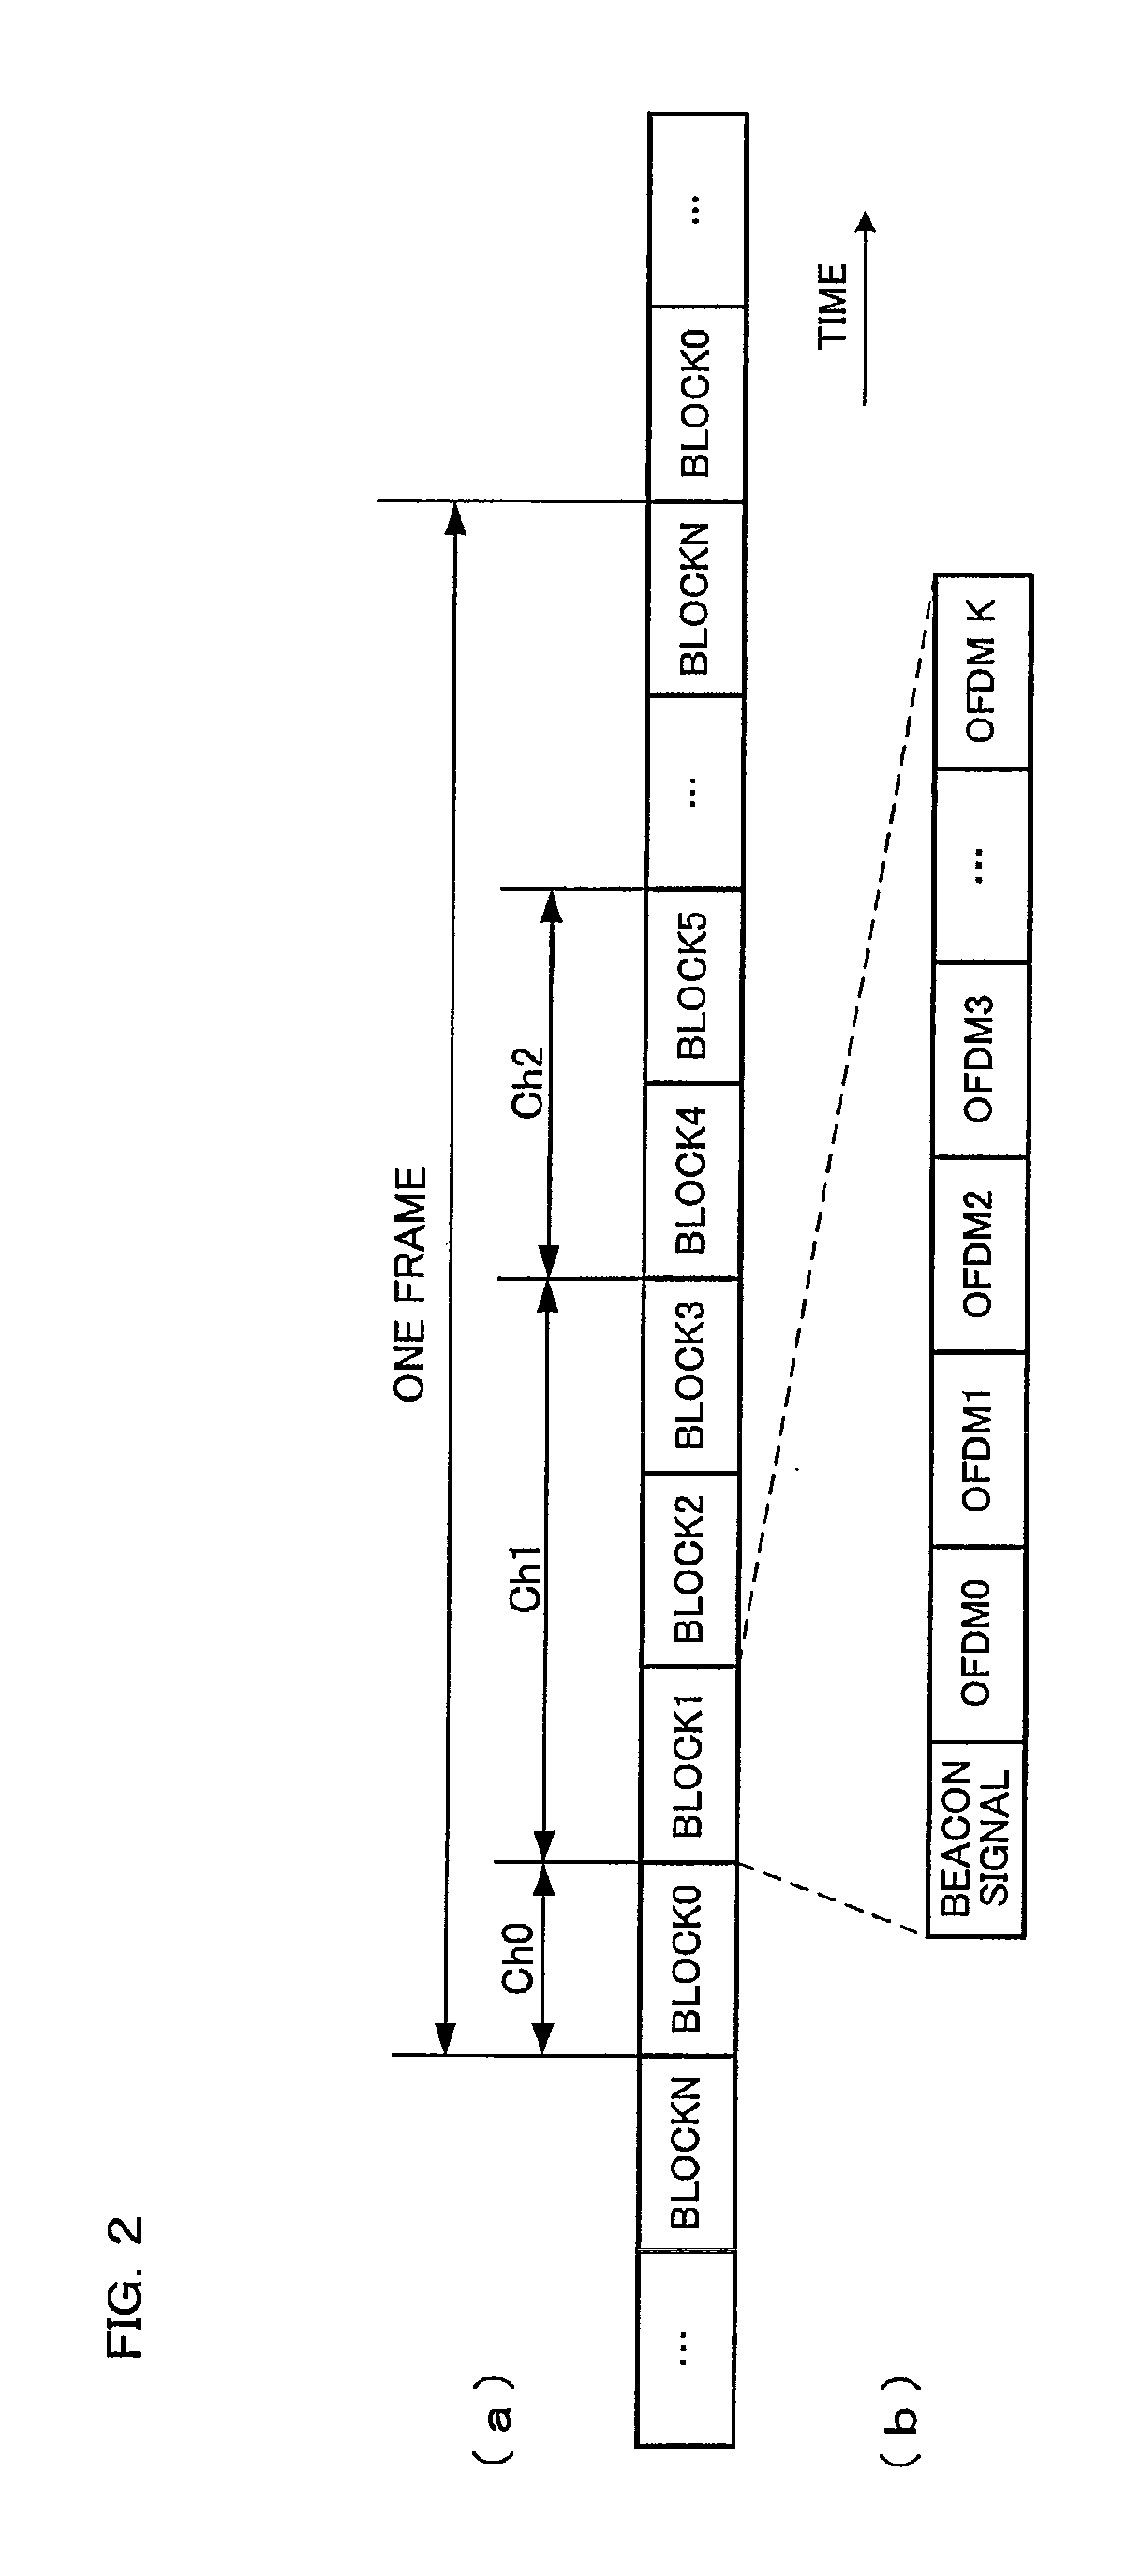 Digital receiver, controlling method of the apparatus, computer program product, and recording medium recording thereon the product